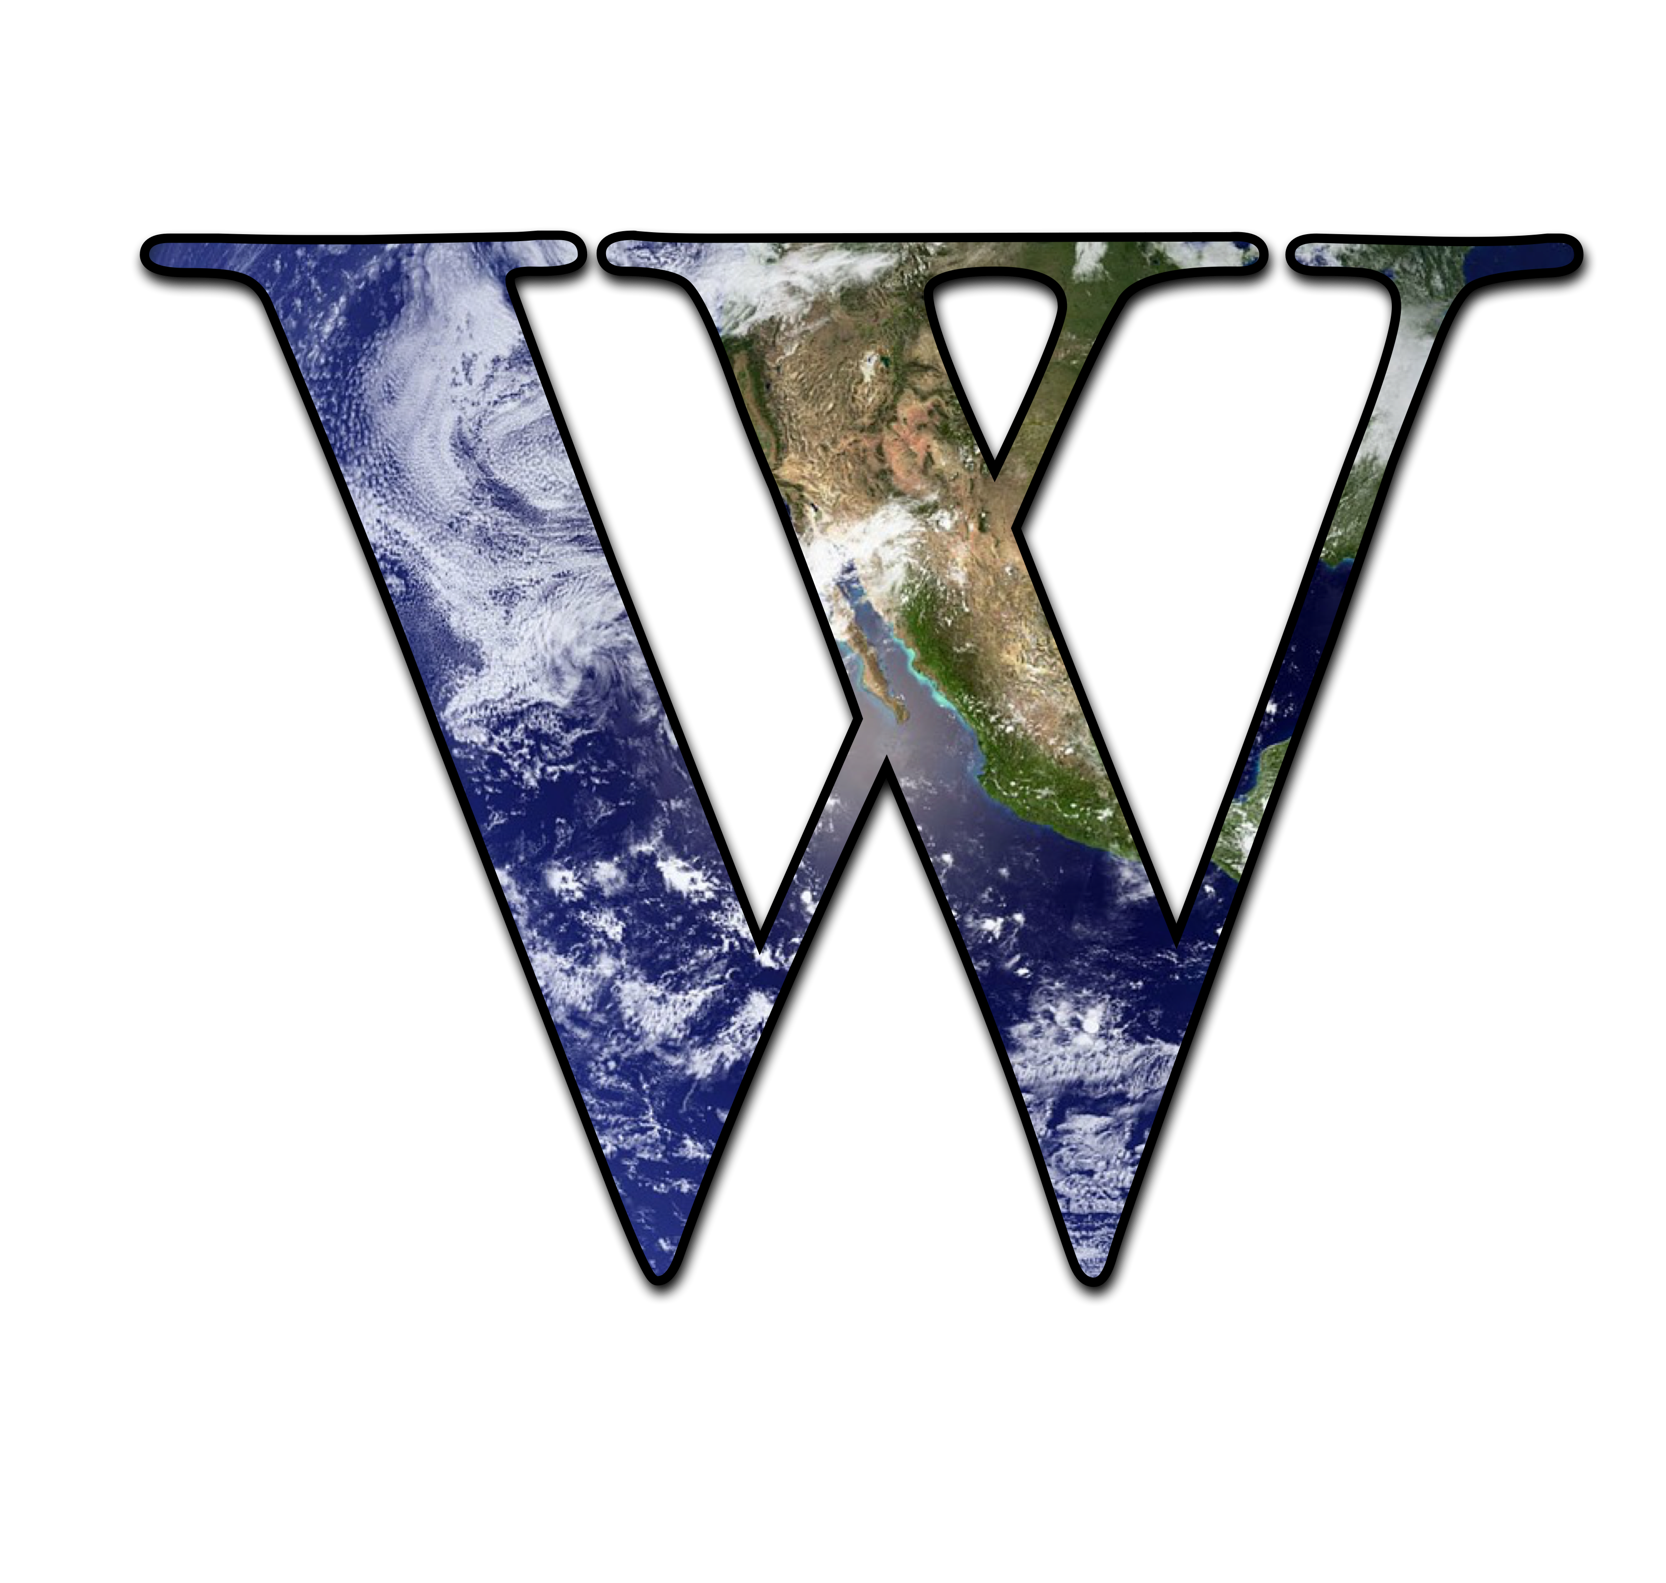 w made from image of world